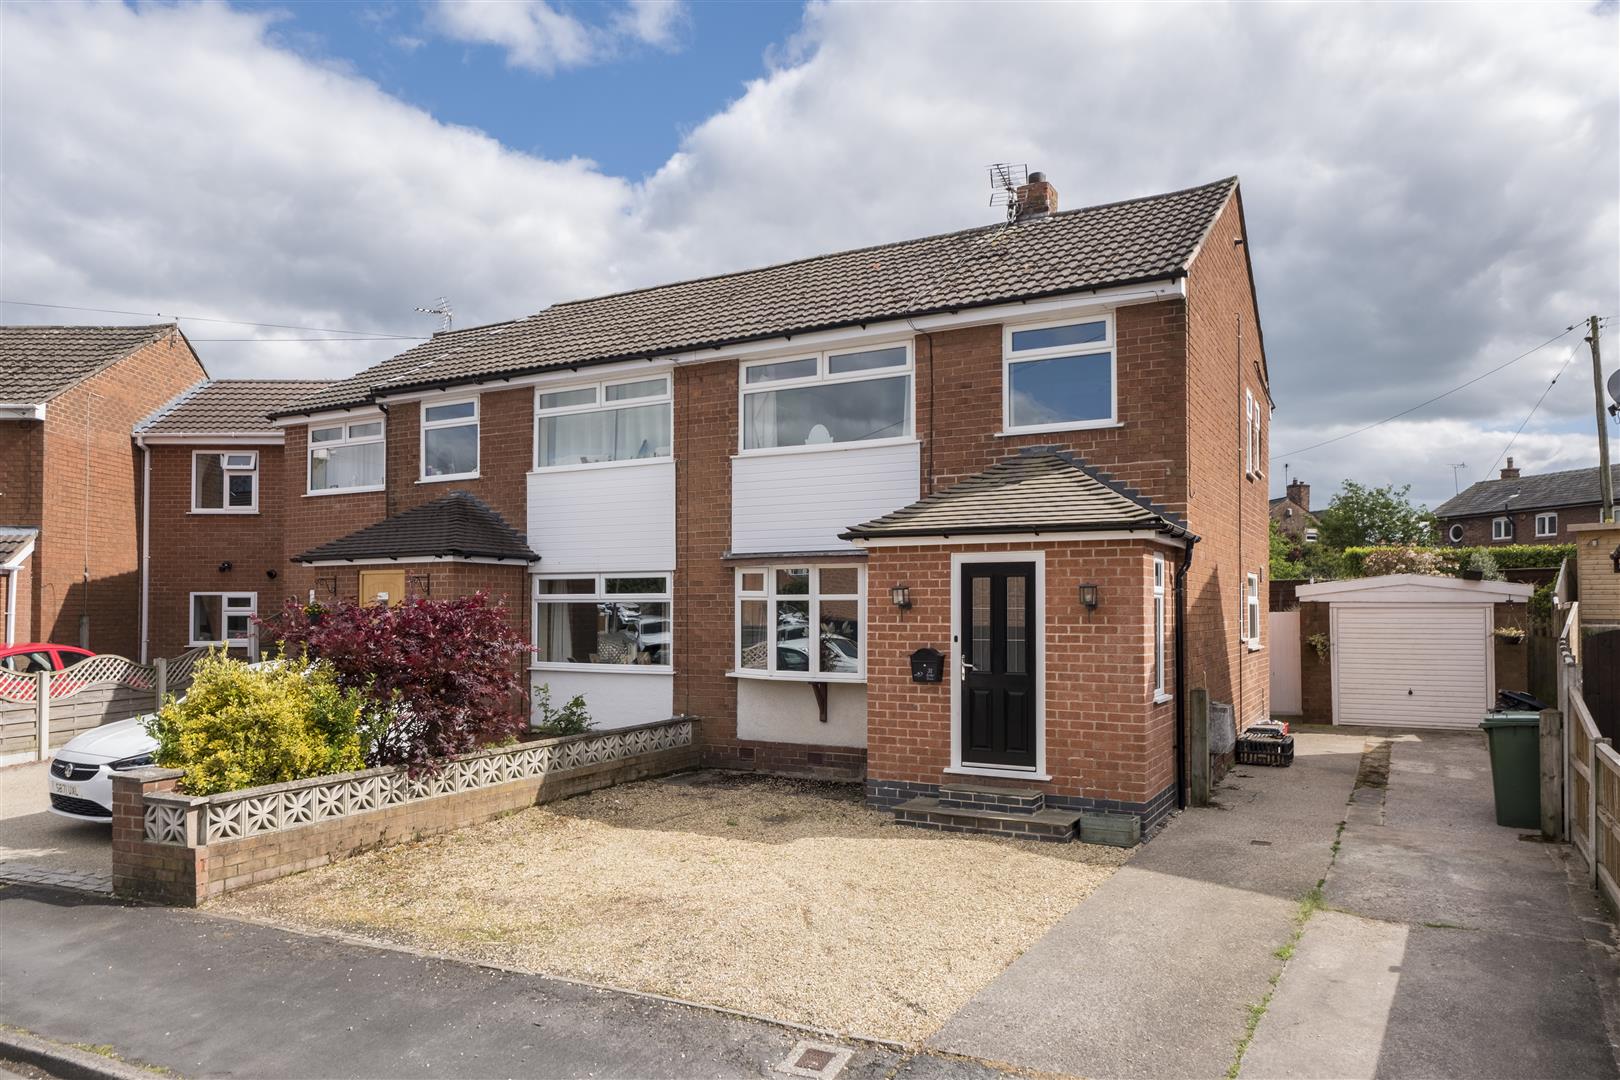 3 bedroom  Semi Detached House for Sale in Northwich